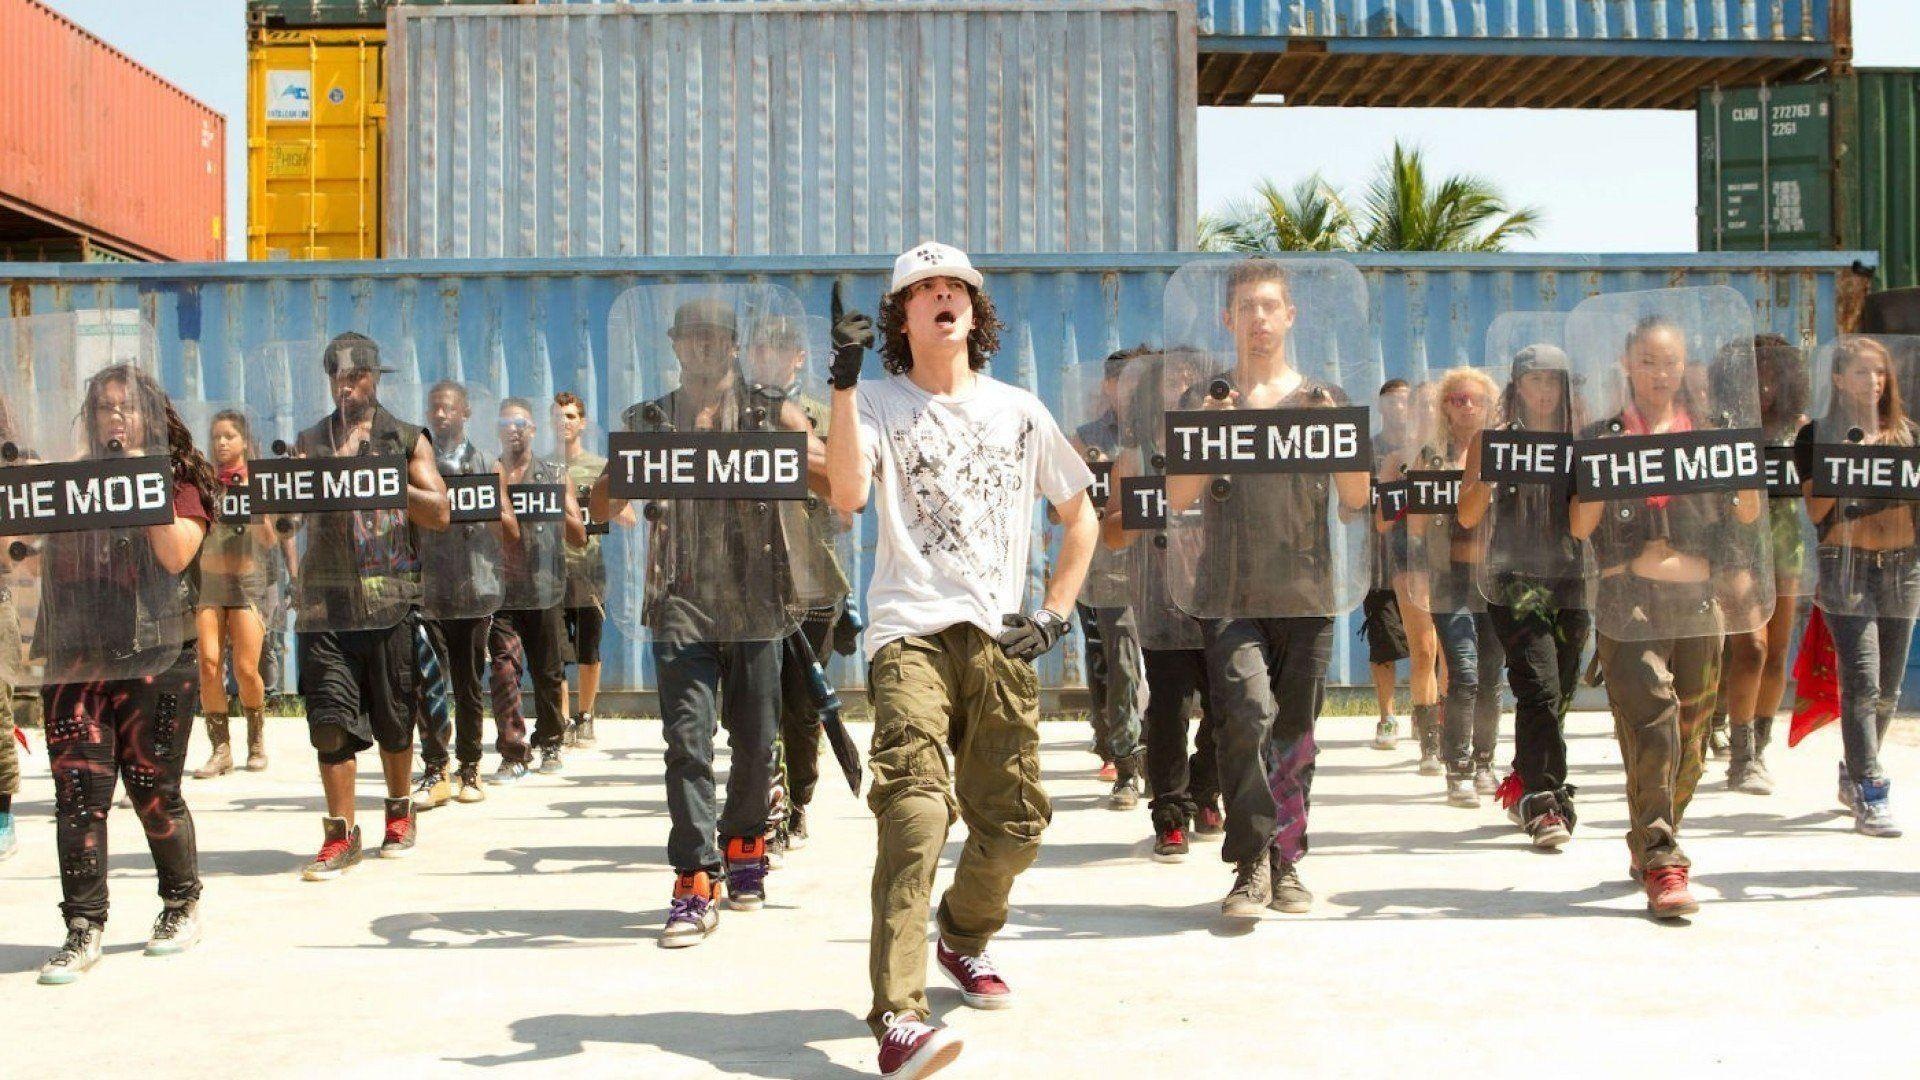 Step Up movie, Dynamic wallpapers, Hip-hop culture, Amazing dance moves, 1920x1080 Full HD Desktop